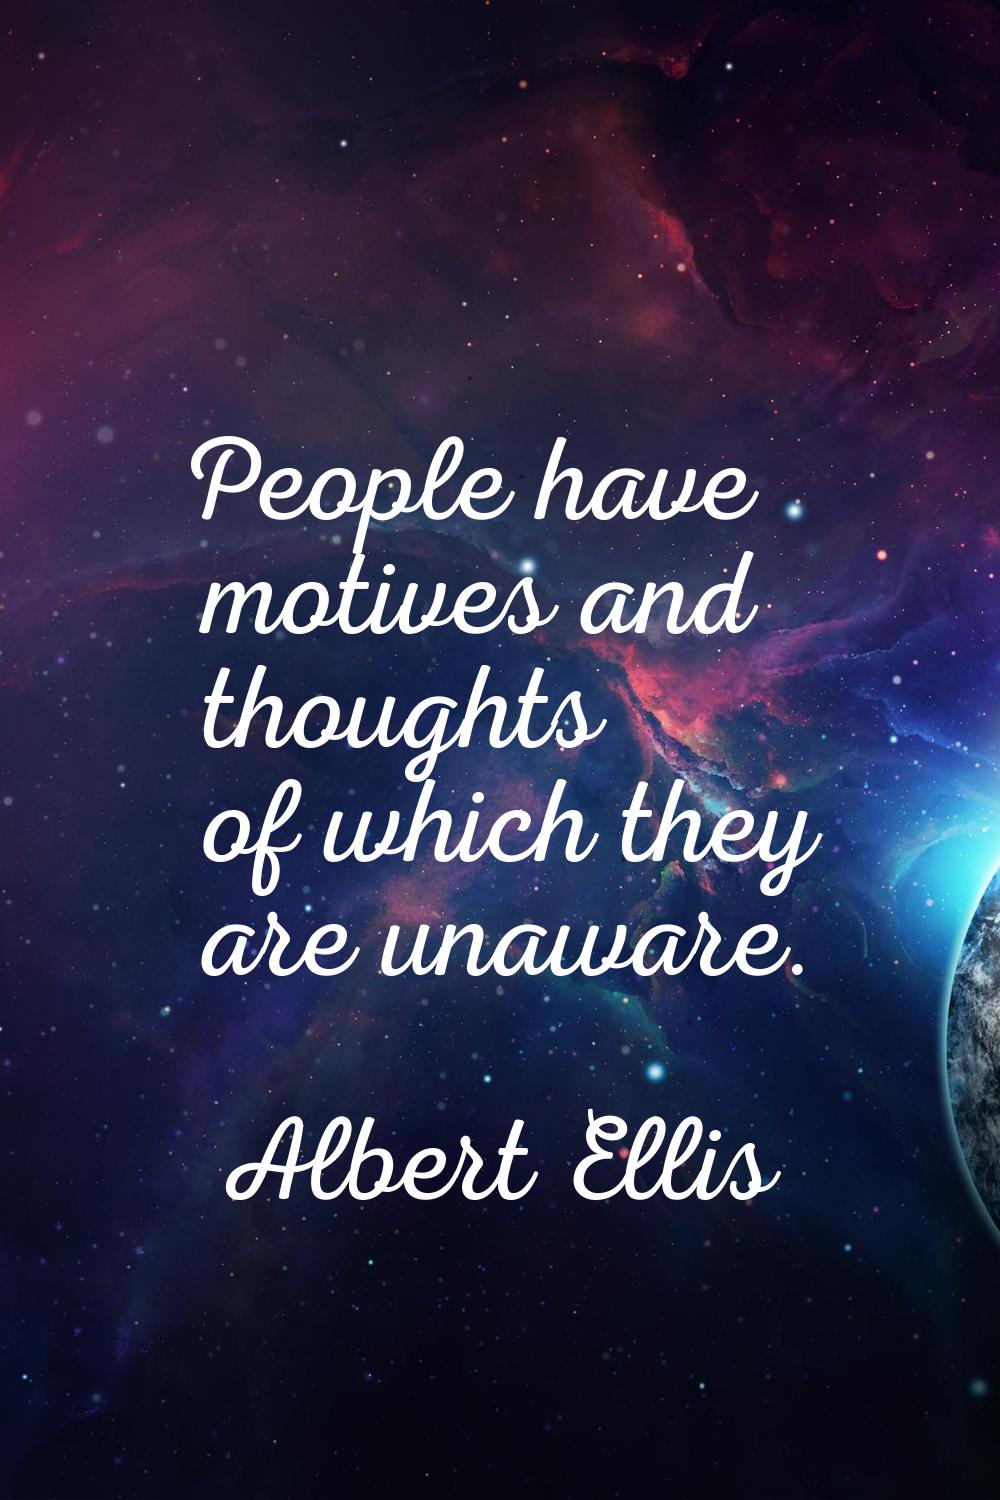 People have motives and thoughts of which they are unaware.